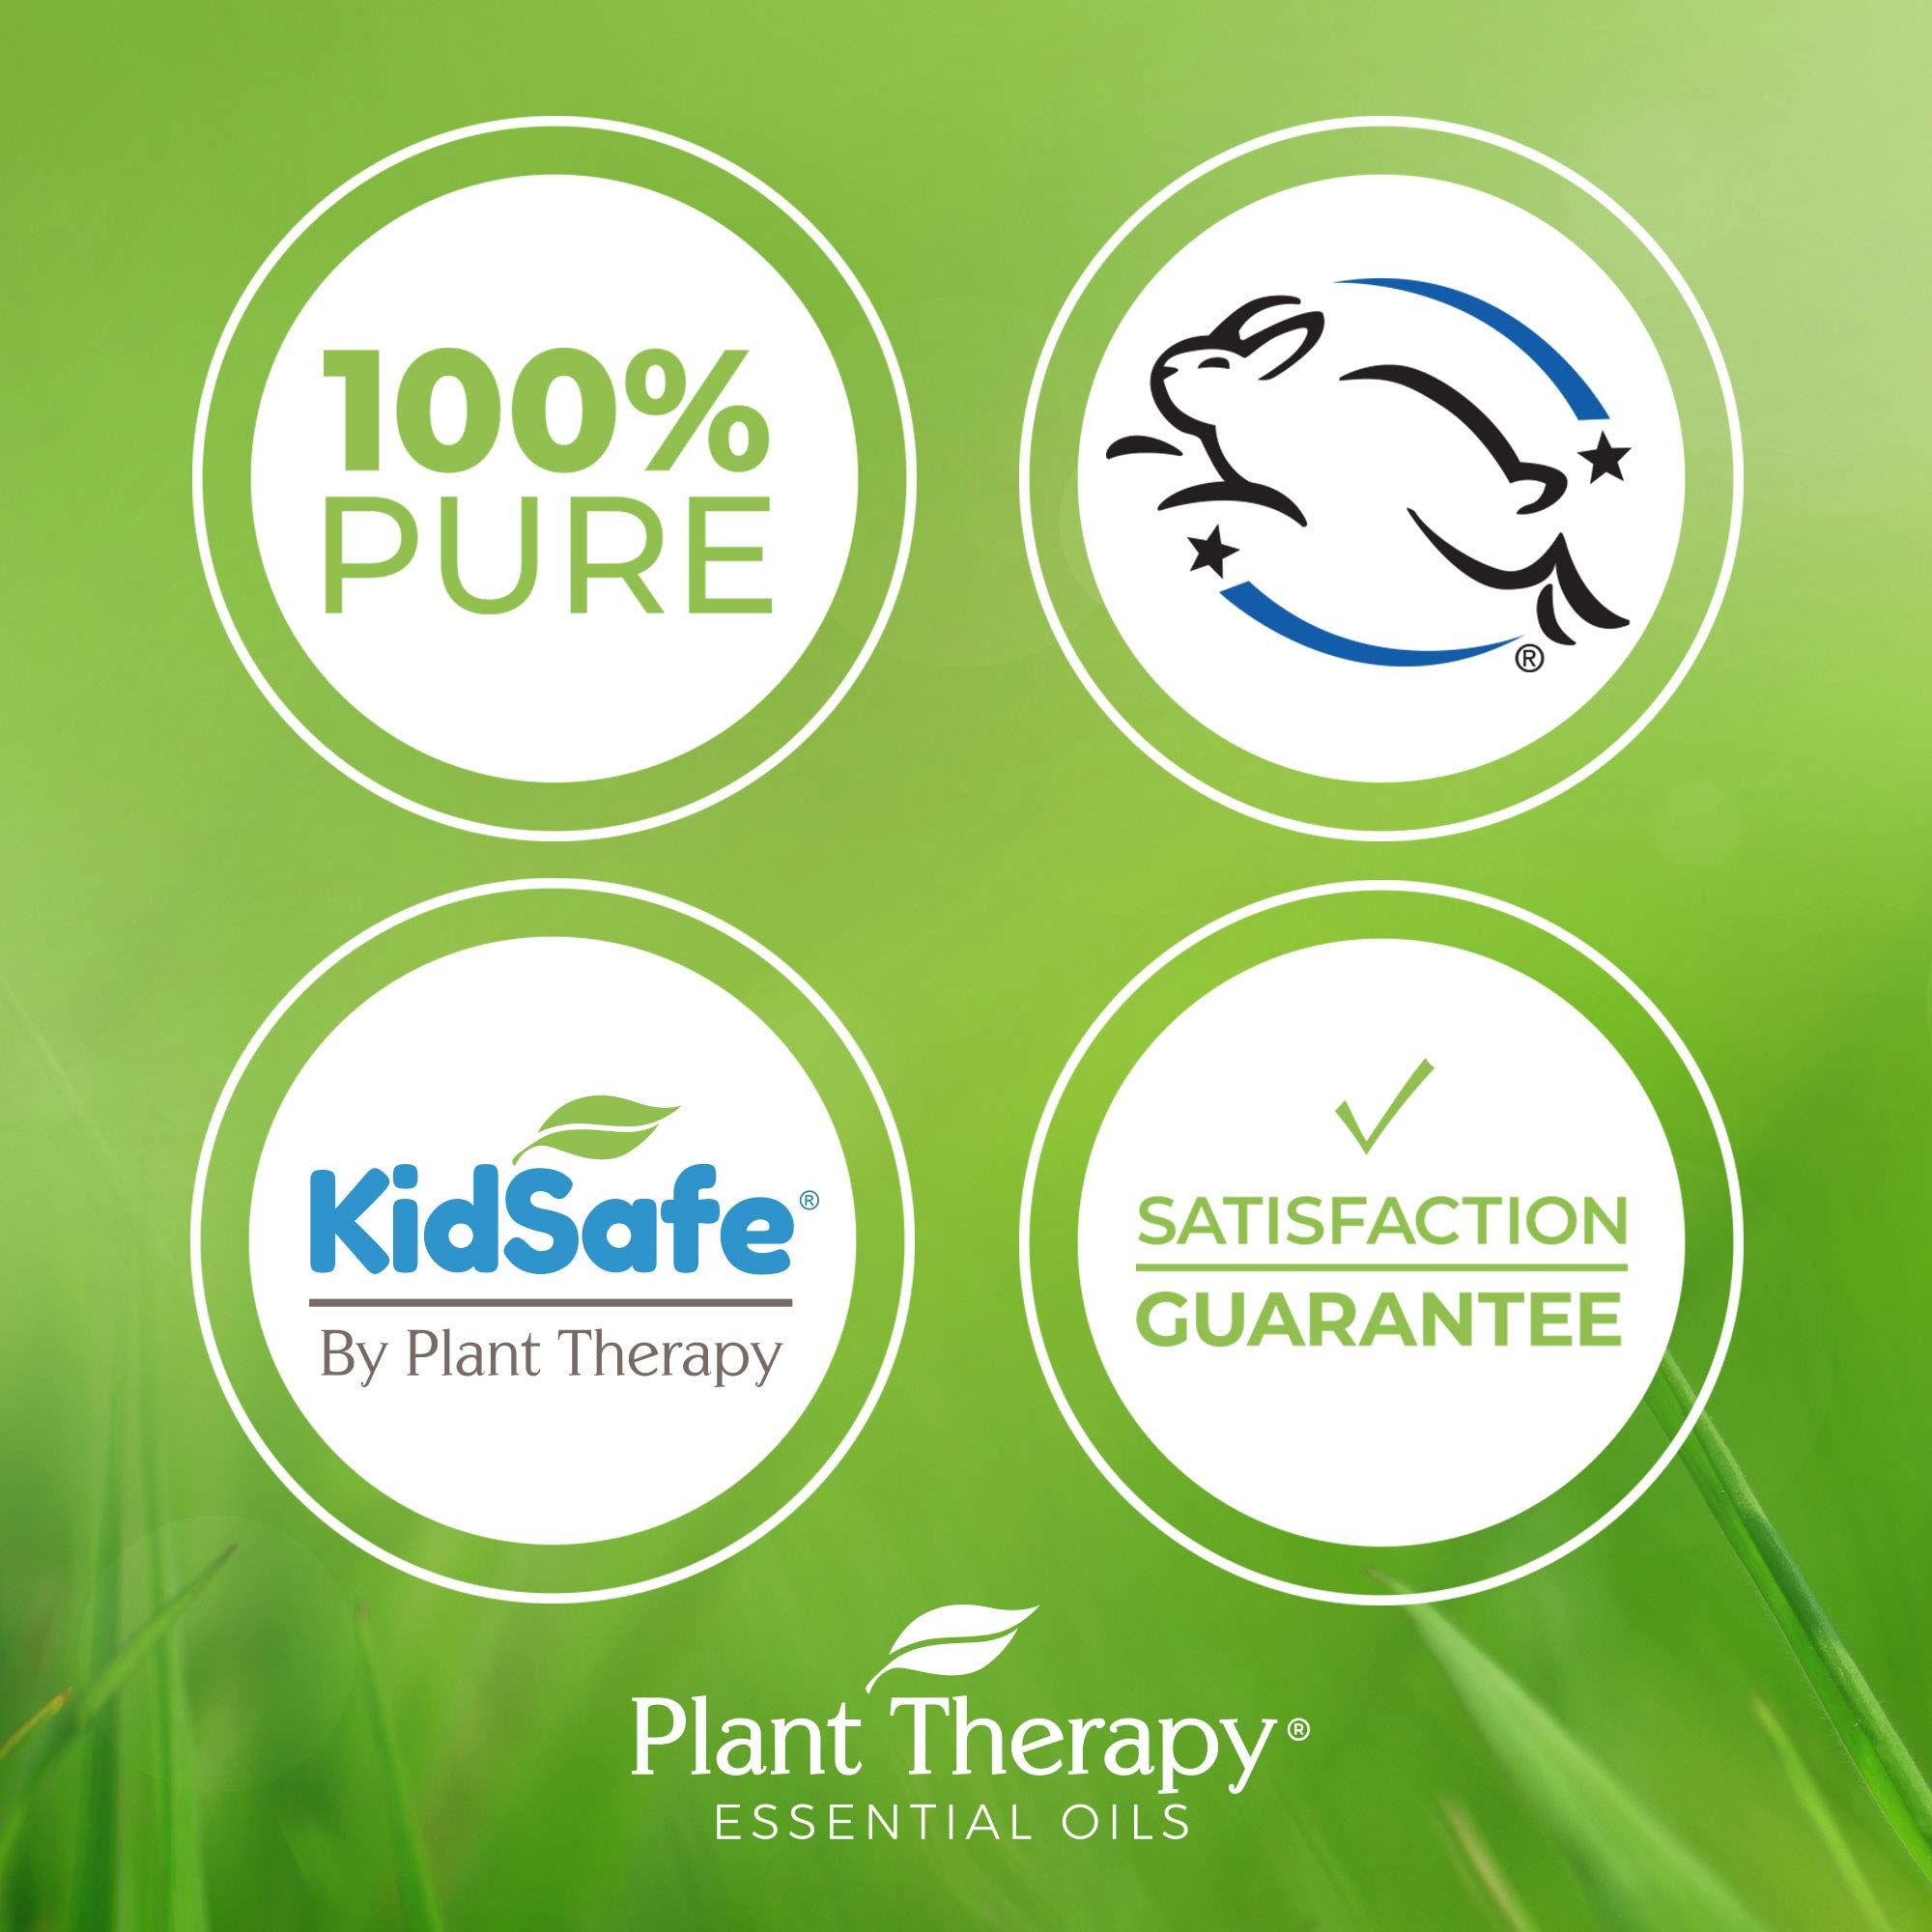 Plant Therapy KidSafe Sniffle Stopper Essential Oil Blend 10 mL (1/3 oz) Respiratory Support Blend 100% Pure, Undiluted, Natural Aromatherapy, Therapeutic Grade